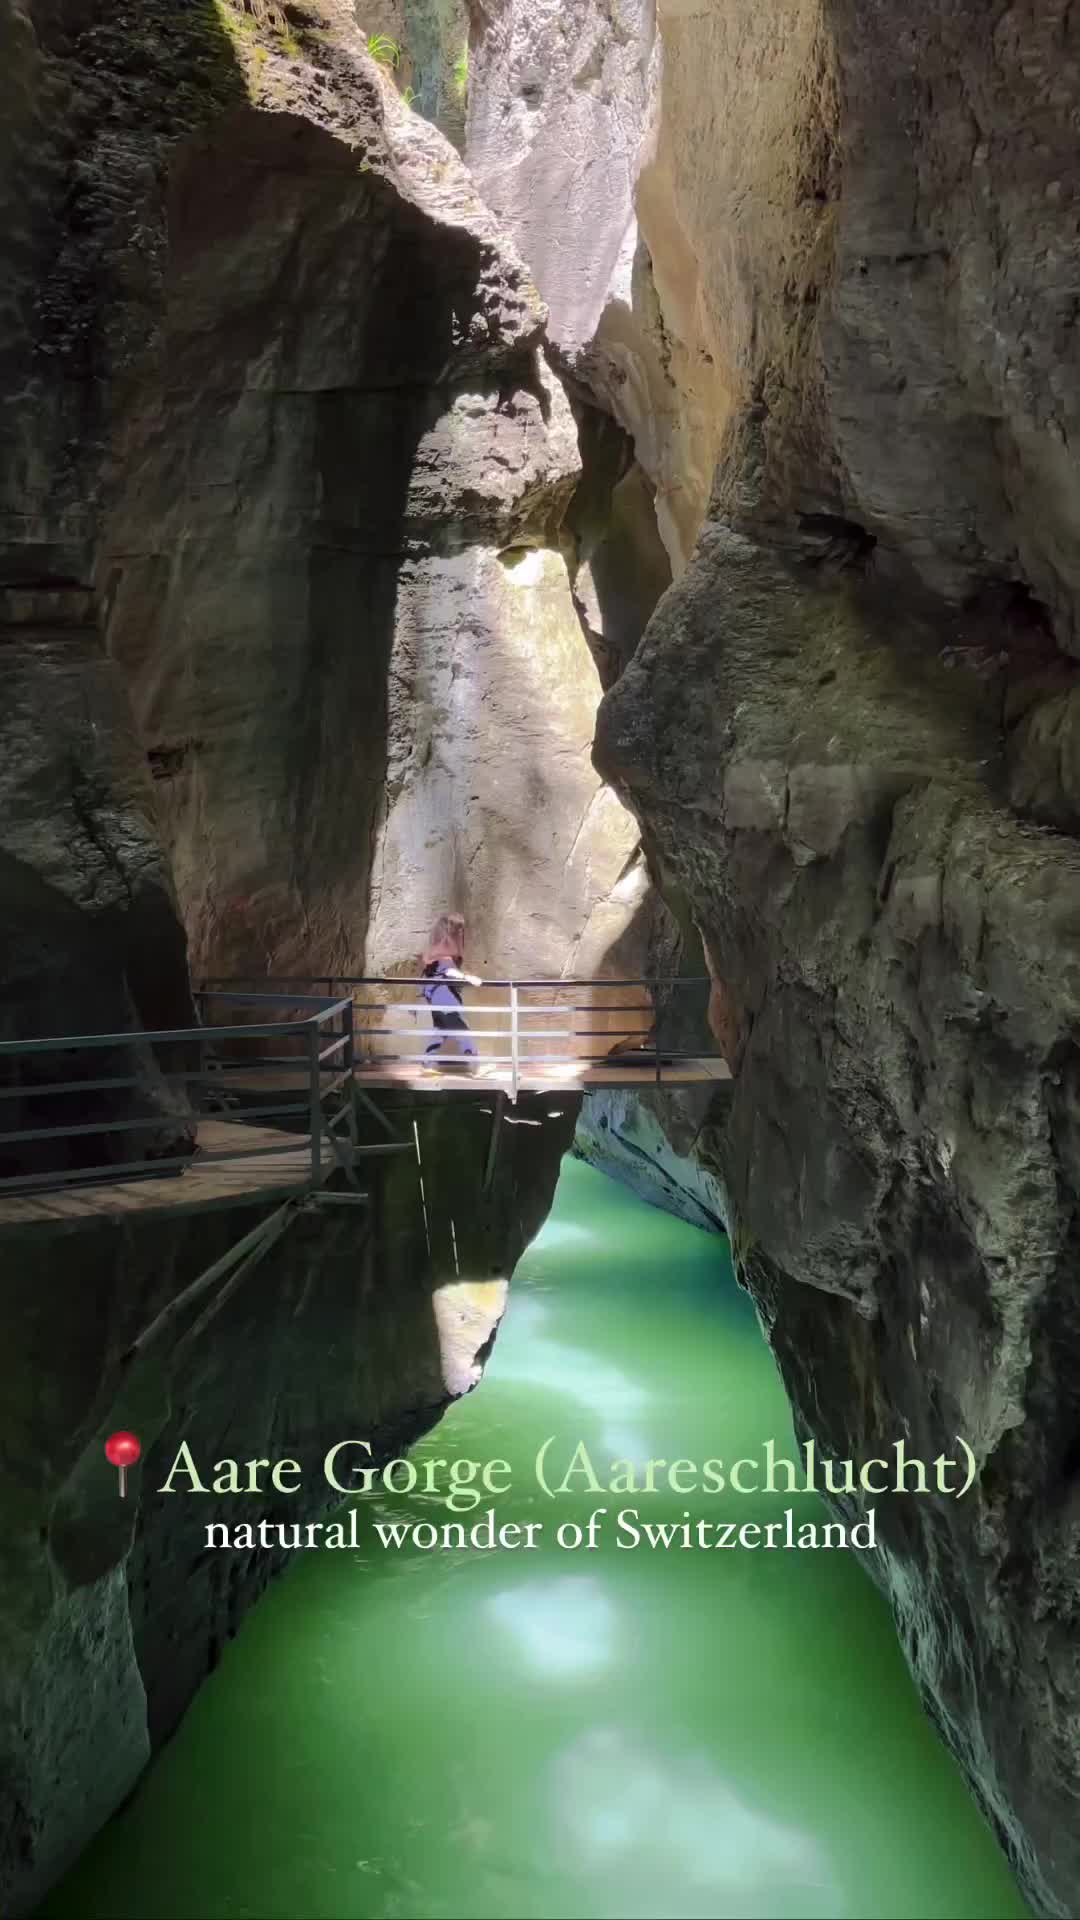 Discover the Aare Gorge: Switzerland's Natural Wonder